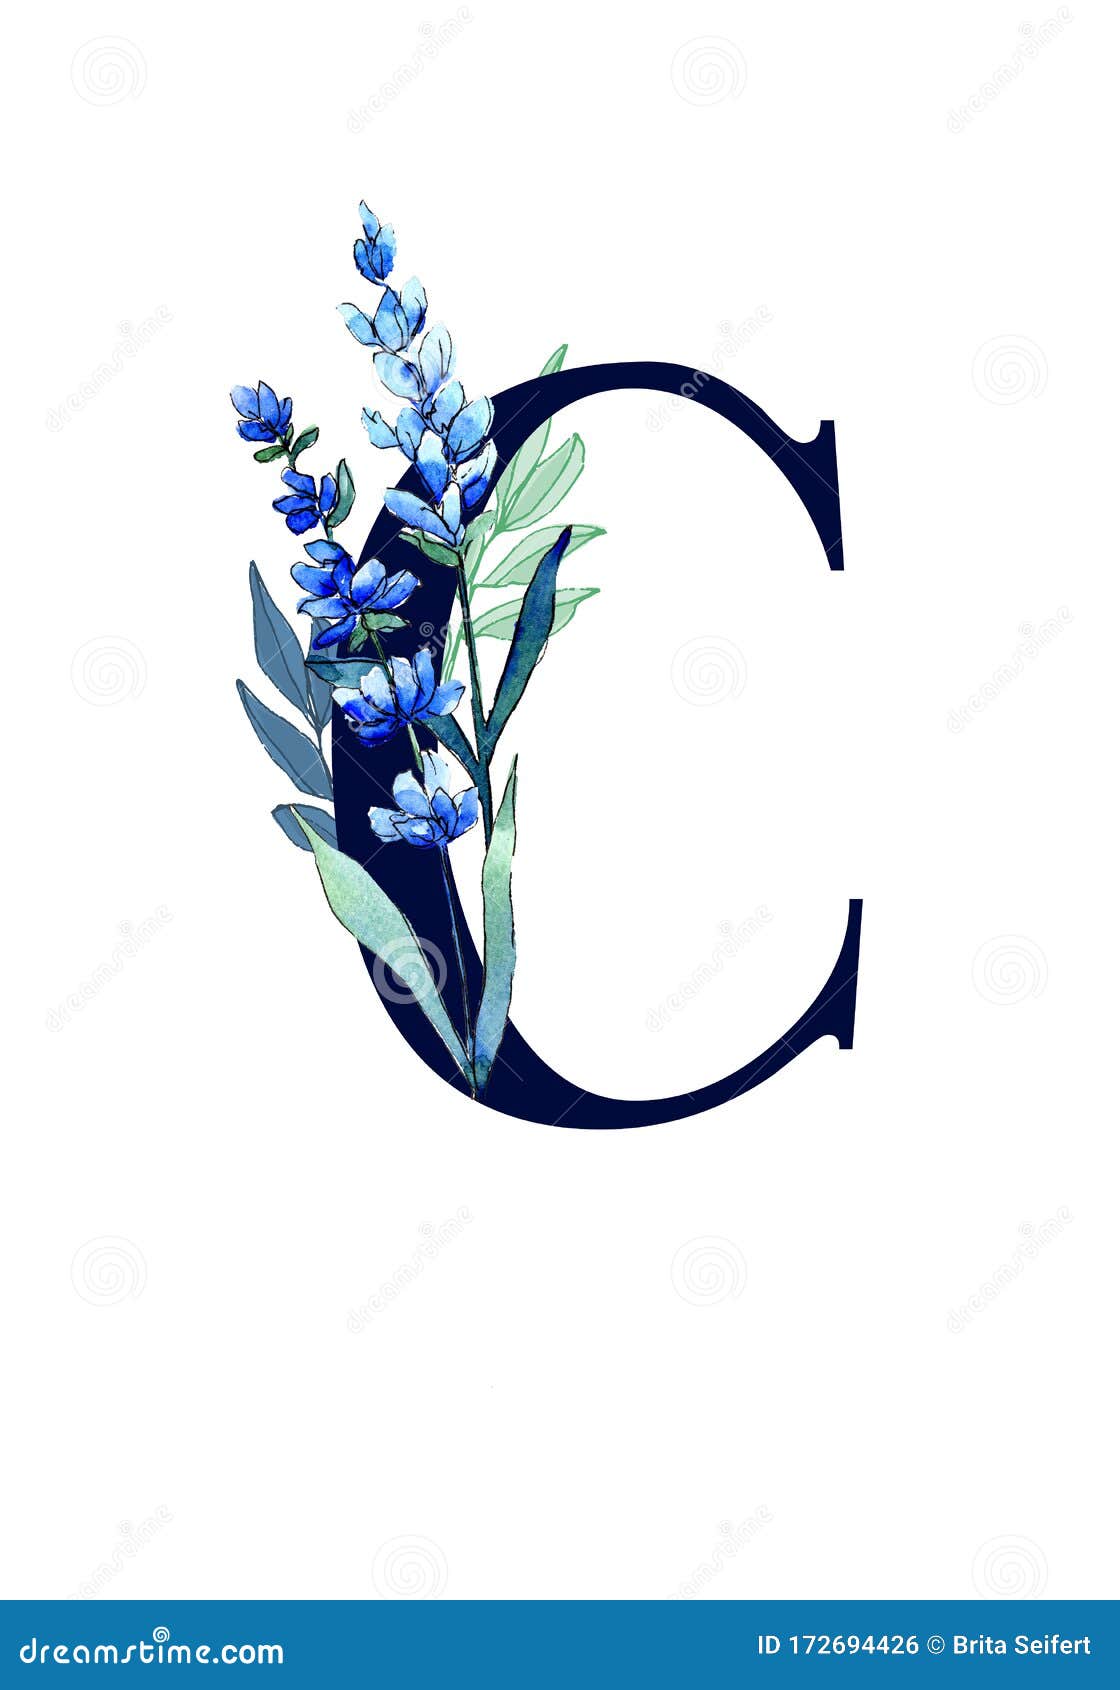 Letter A in blue watercolor flowers and leaves. Floral monogram